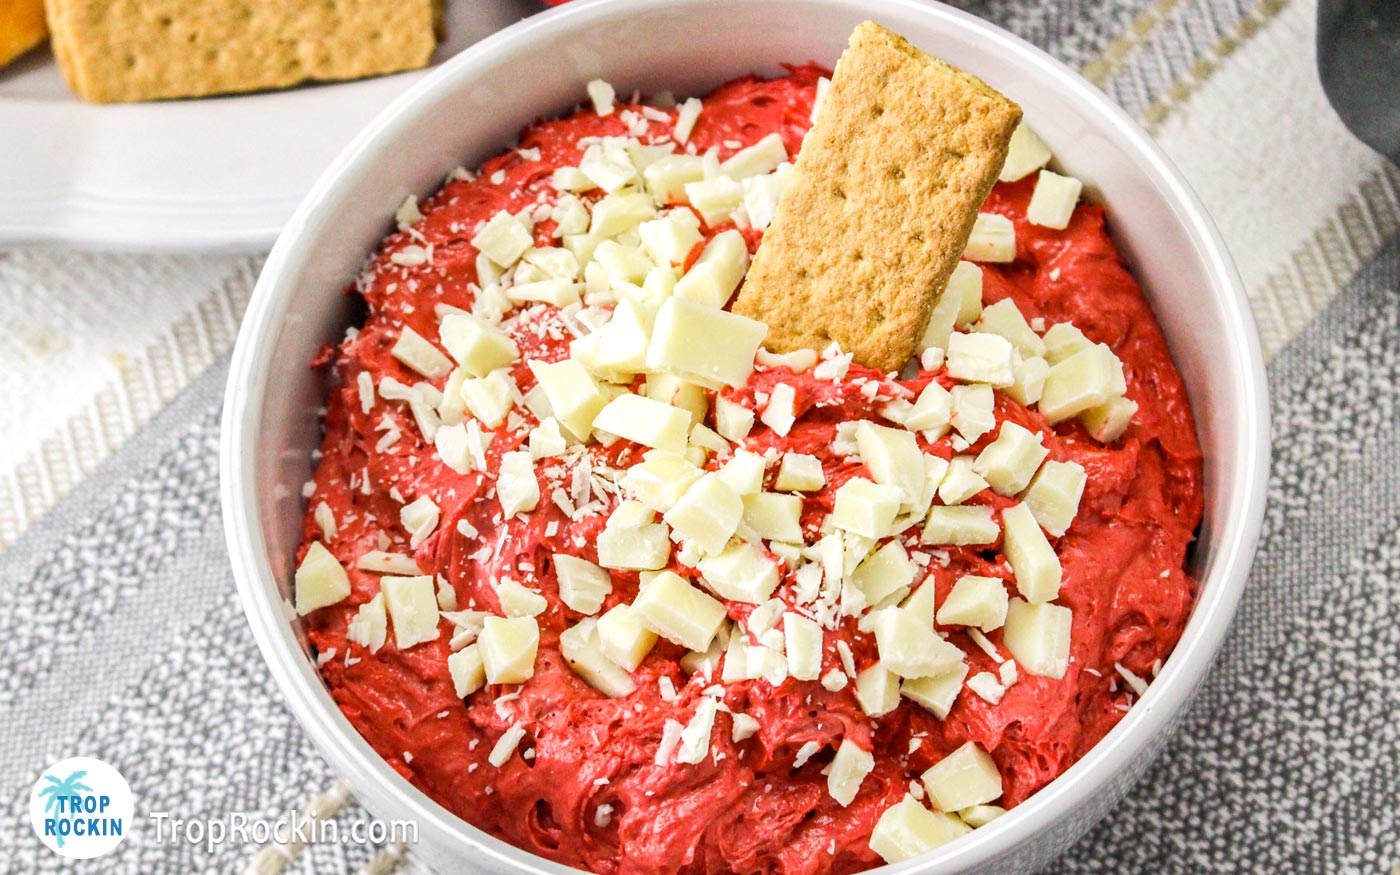 Bowl of Red Velvet Dip with white chocolate pieces on top and a graham cracker dipped in the dip.